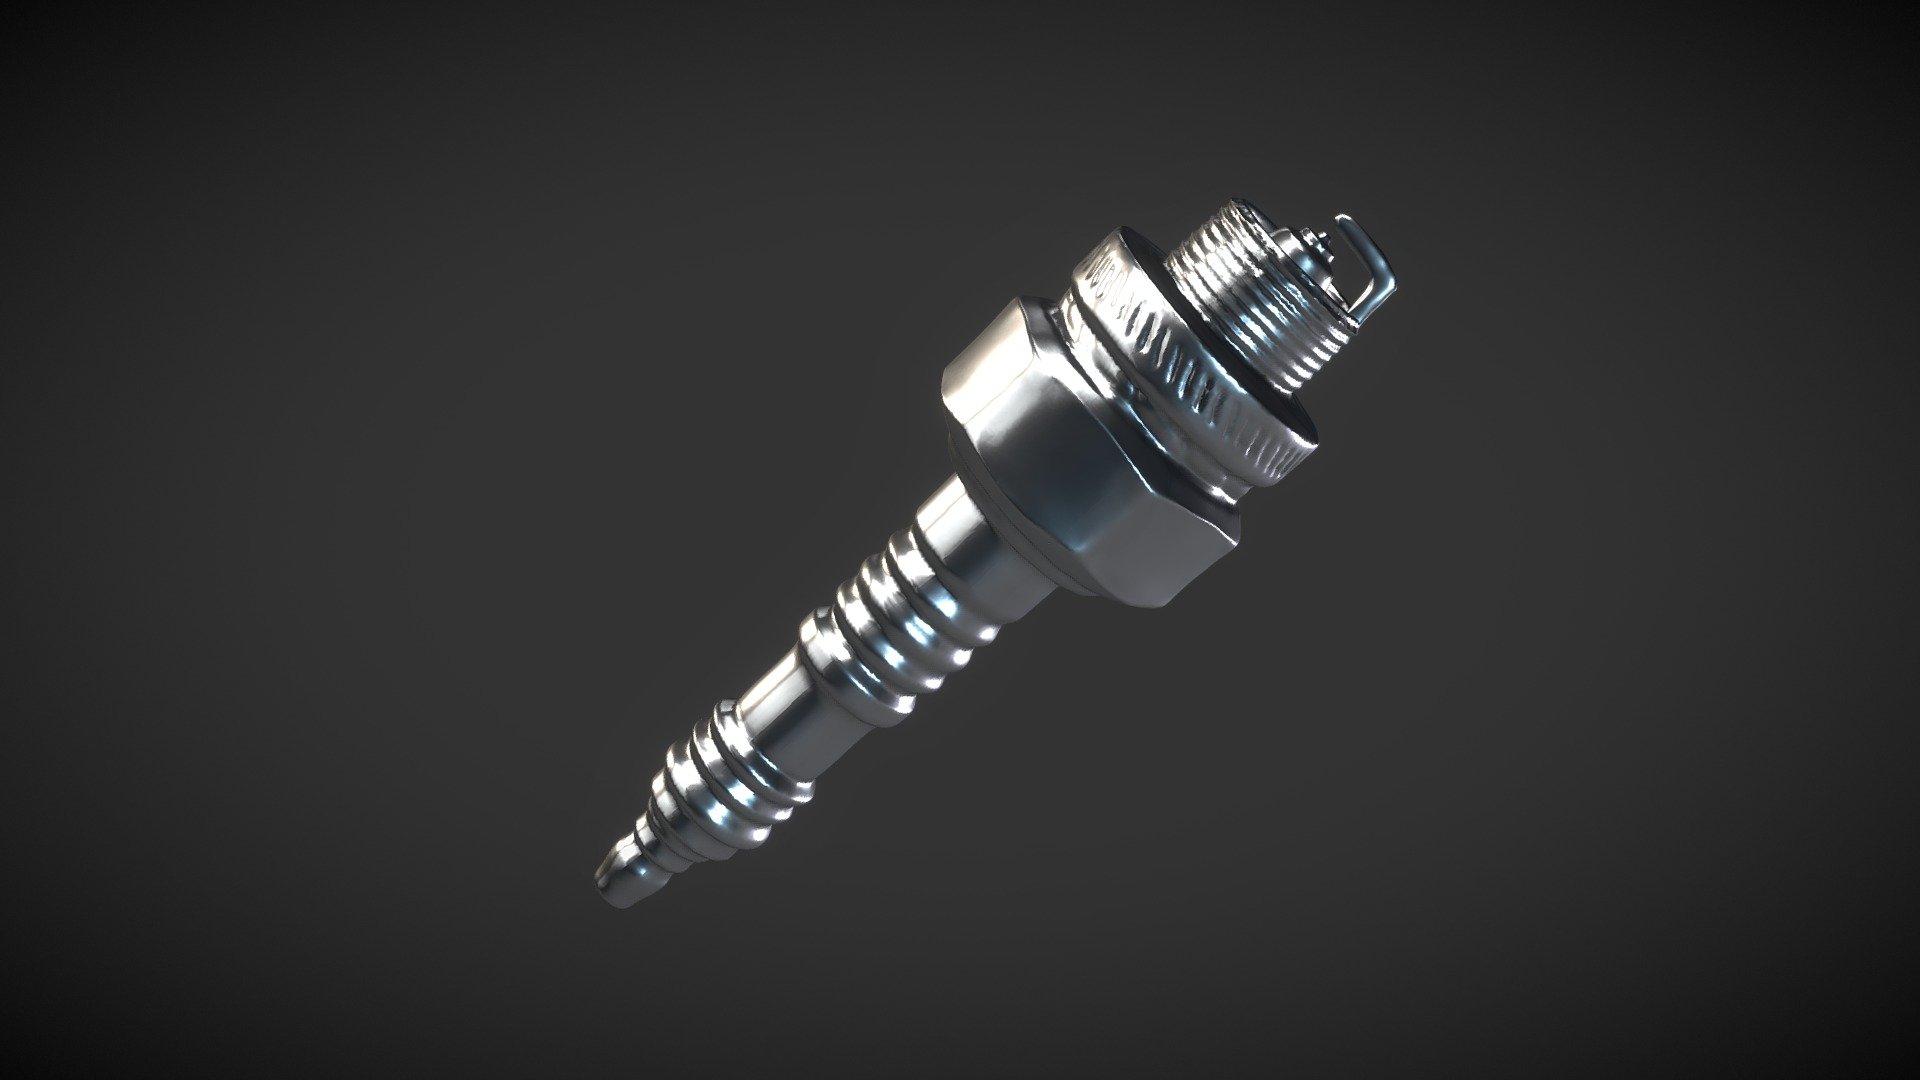 Sculpt January 2018 challenge
30 Vehicle - Spark Plug |Time Spent - 30 min
Software Used - ZBrush

It was fun 3d model